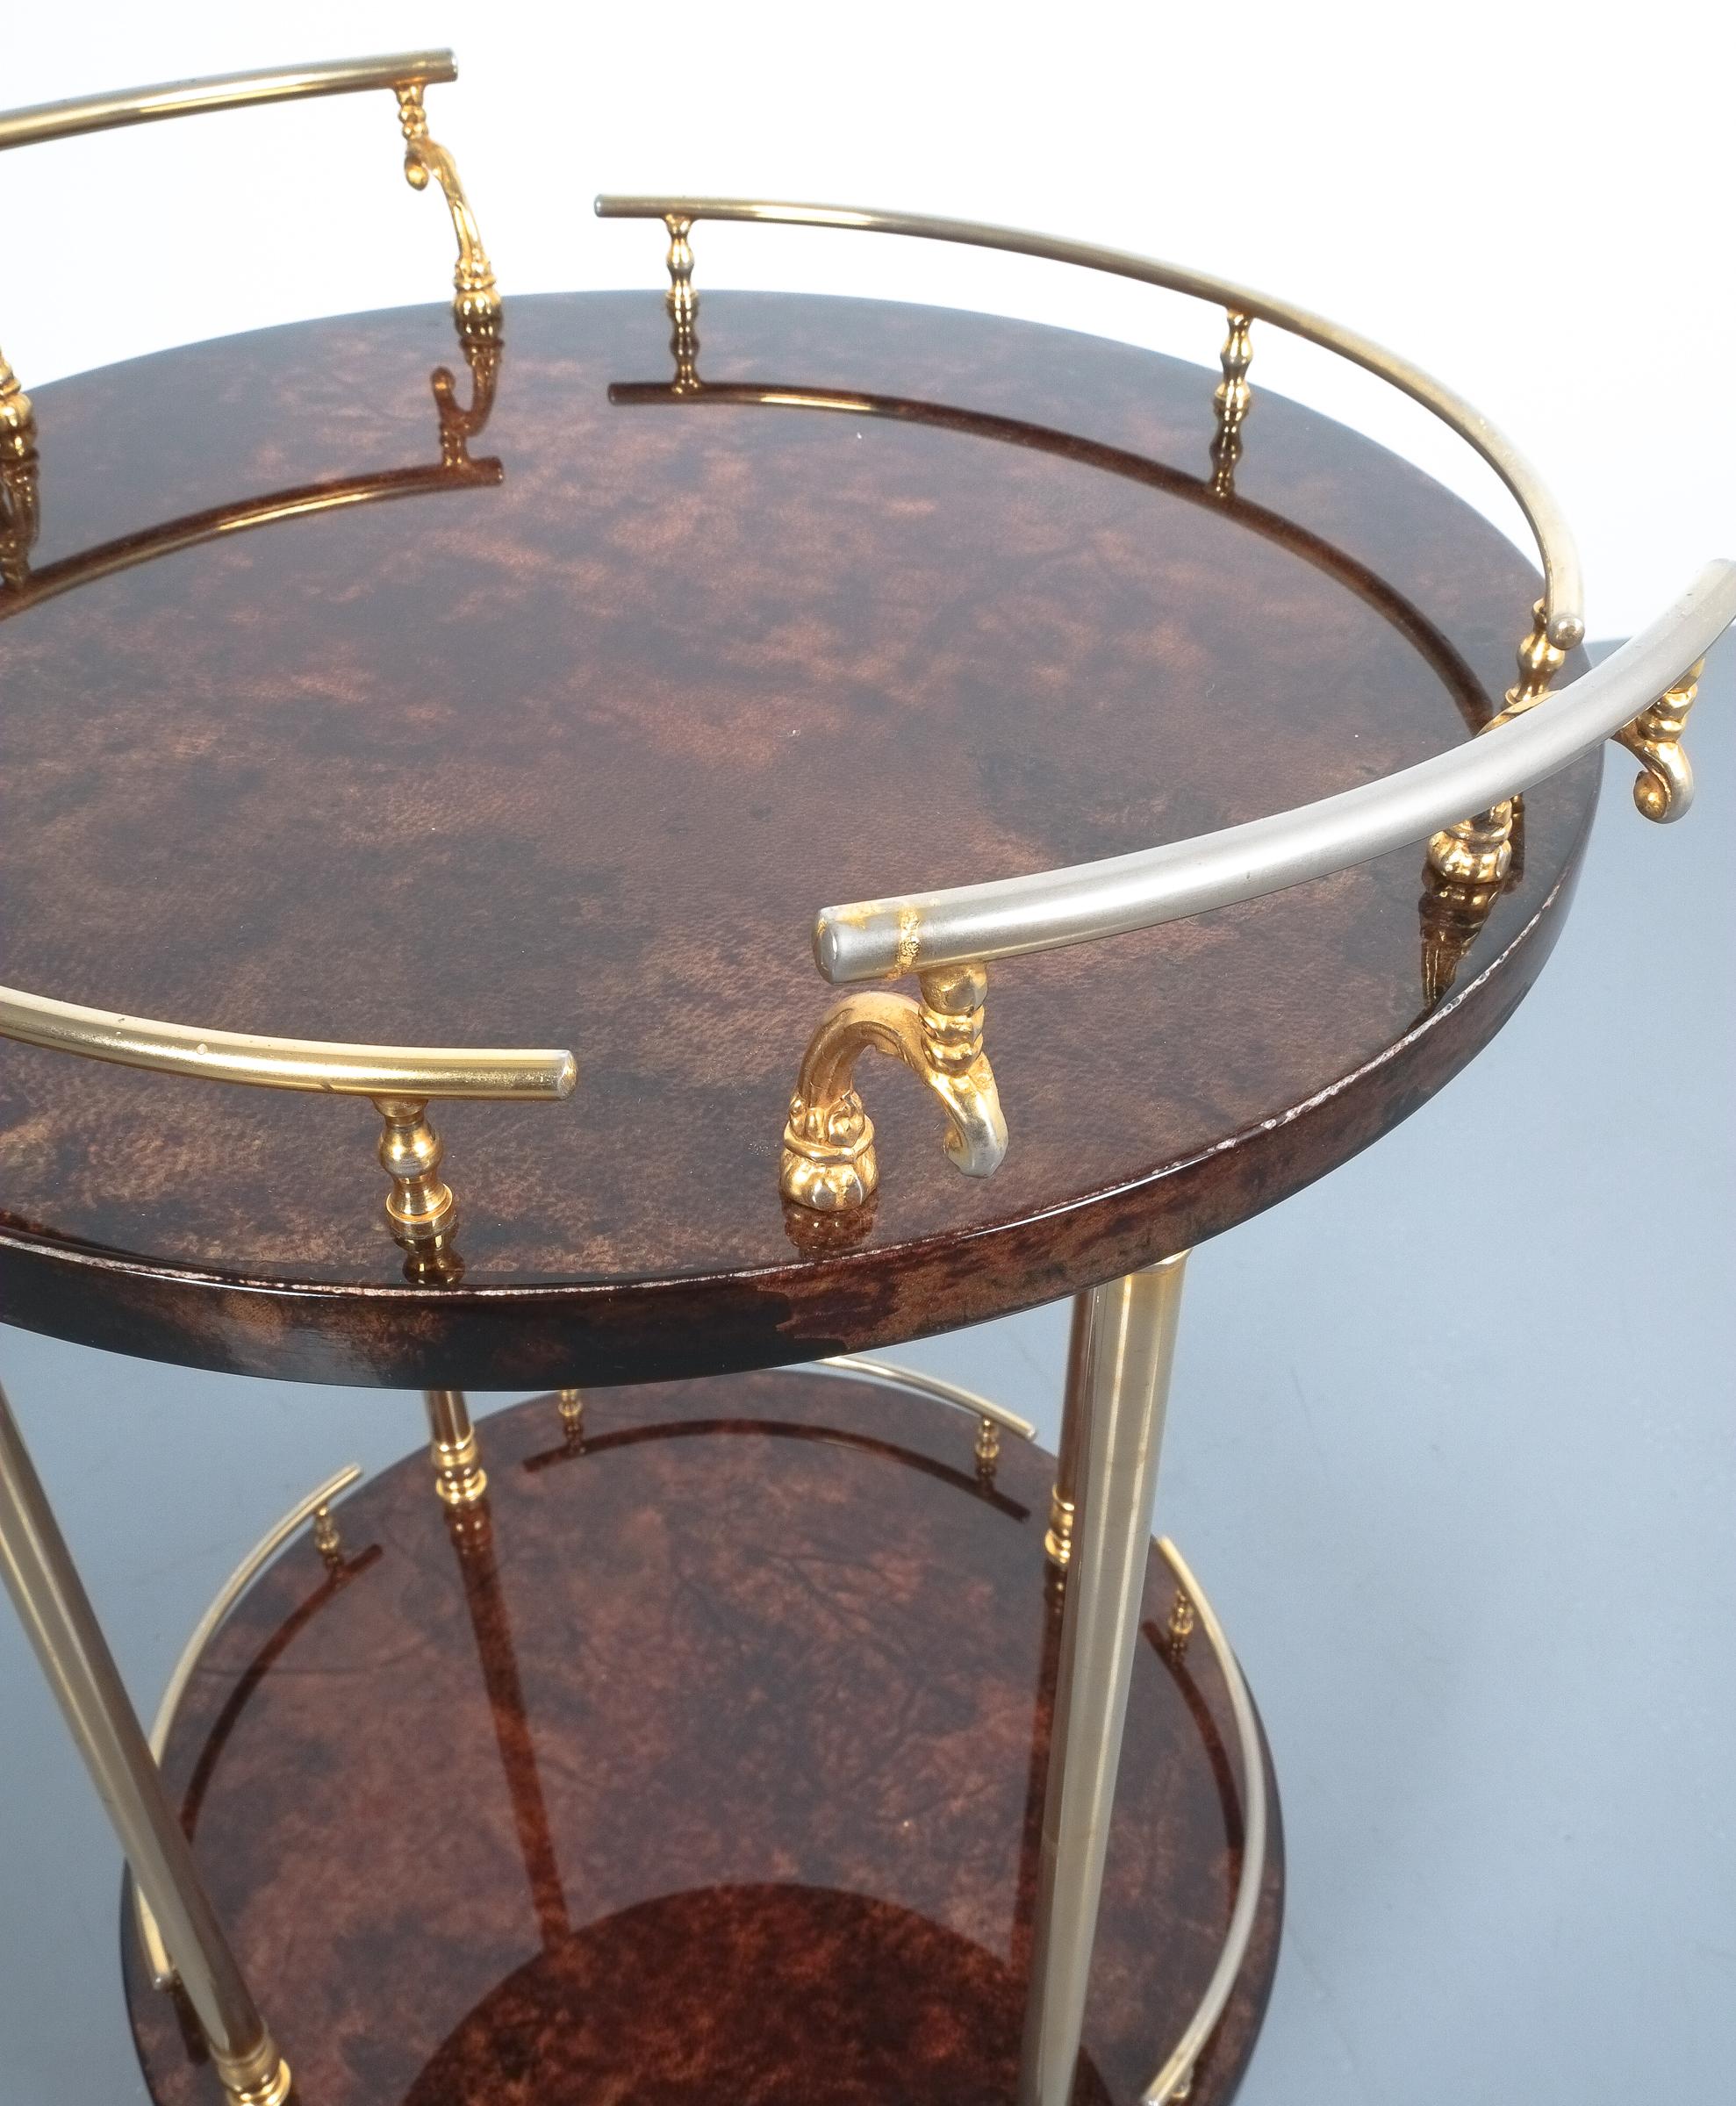 Italian Aldo Tura Bar Cart or Side Table from Brown Parchment, circa 1960